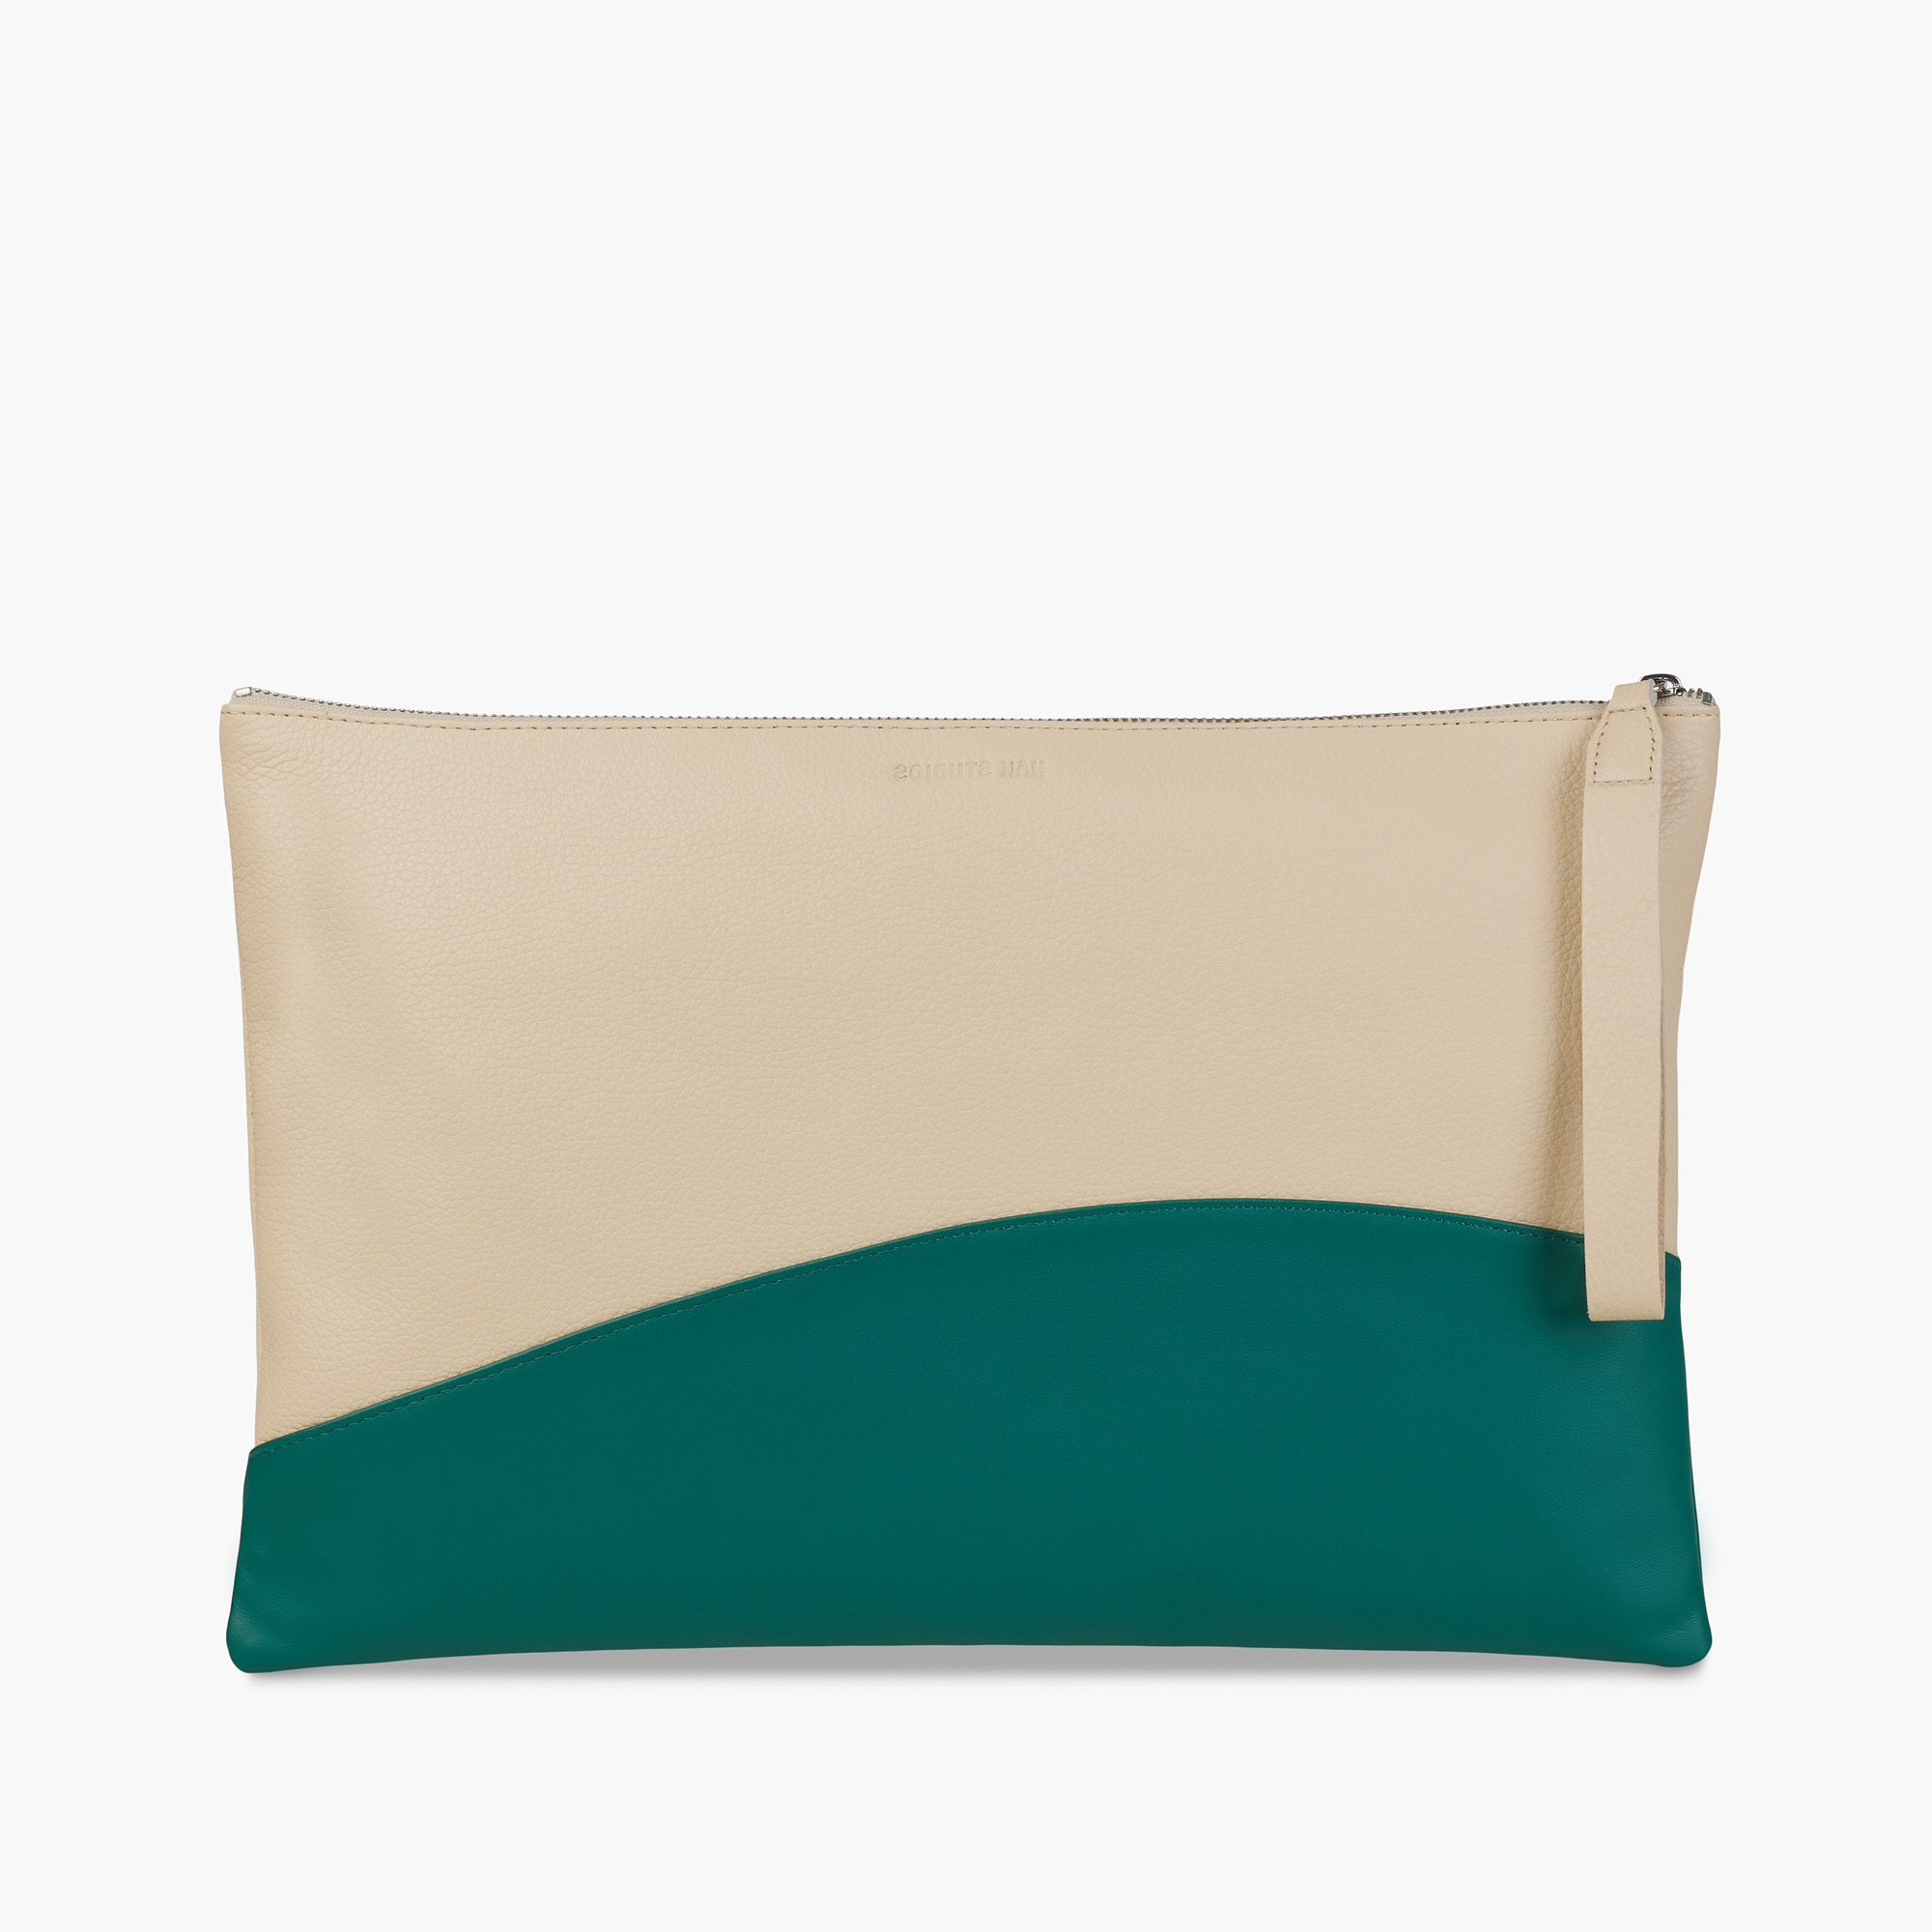 Leather purse in beige and green color